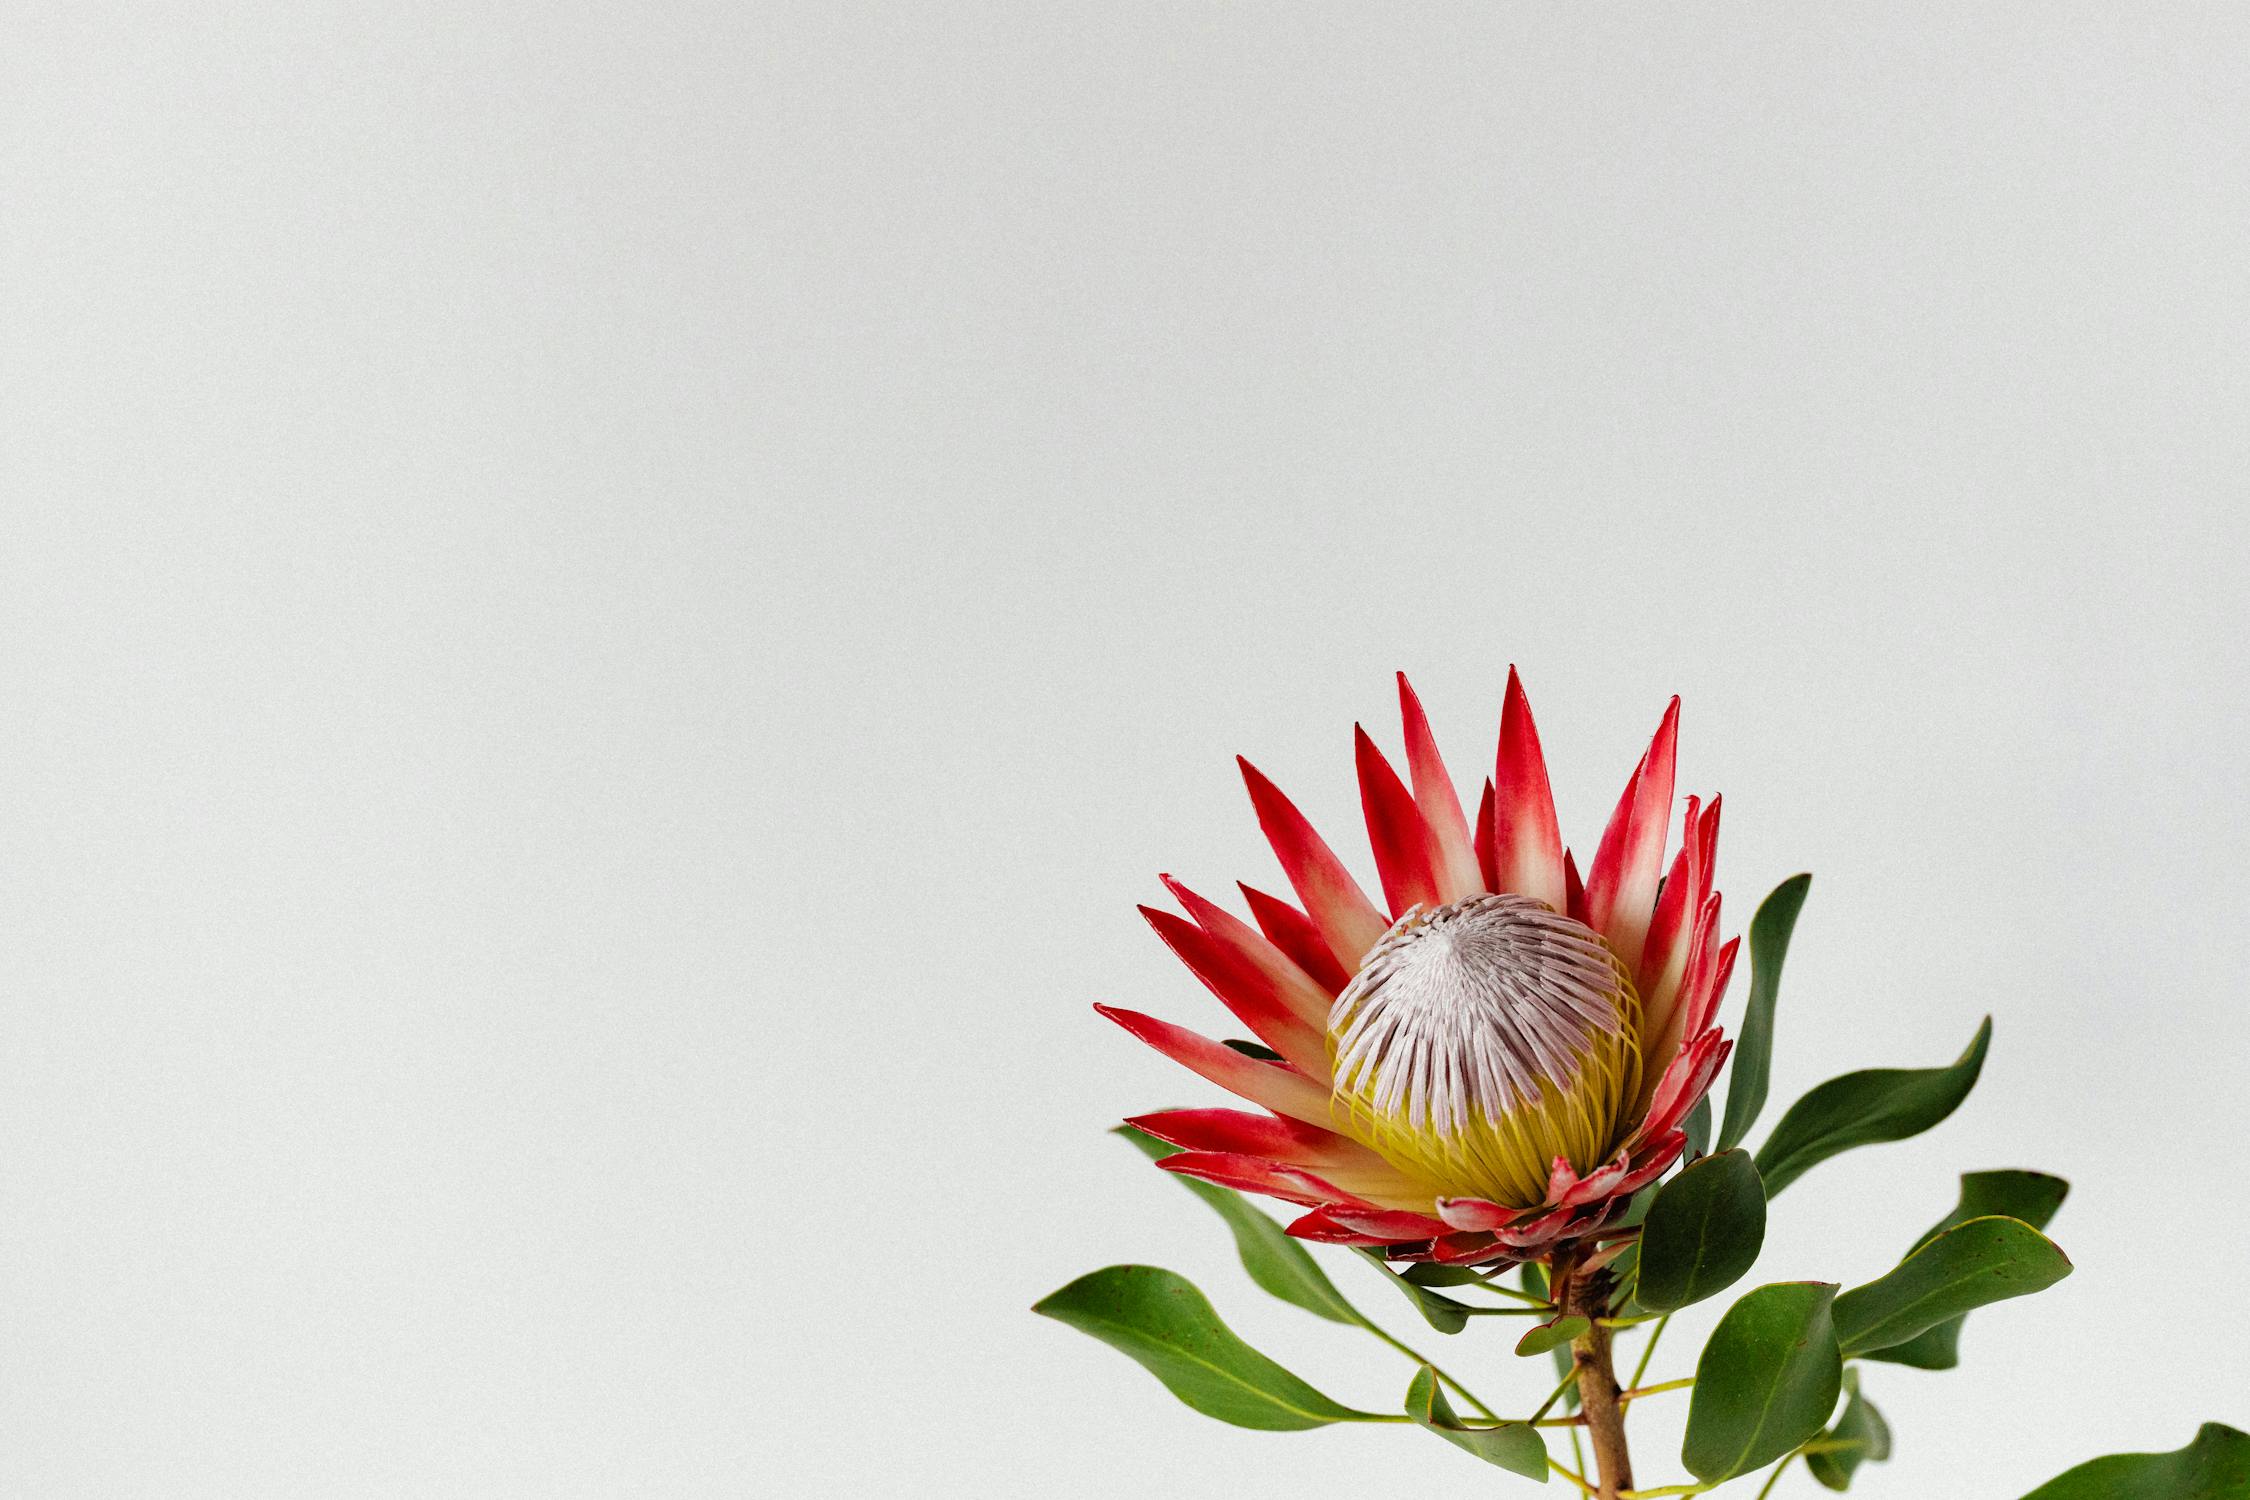 Red Flower on White Background · Free Stock Photo